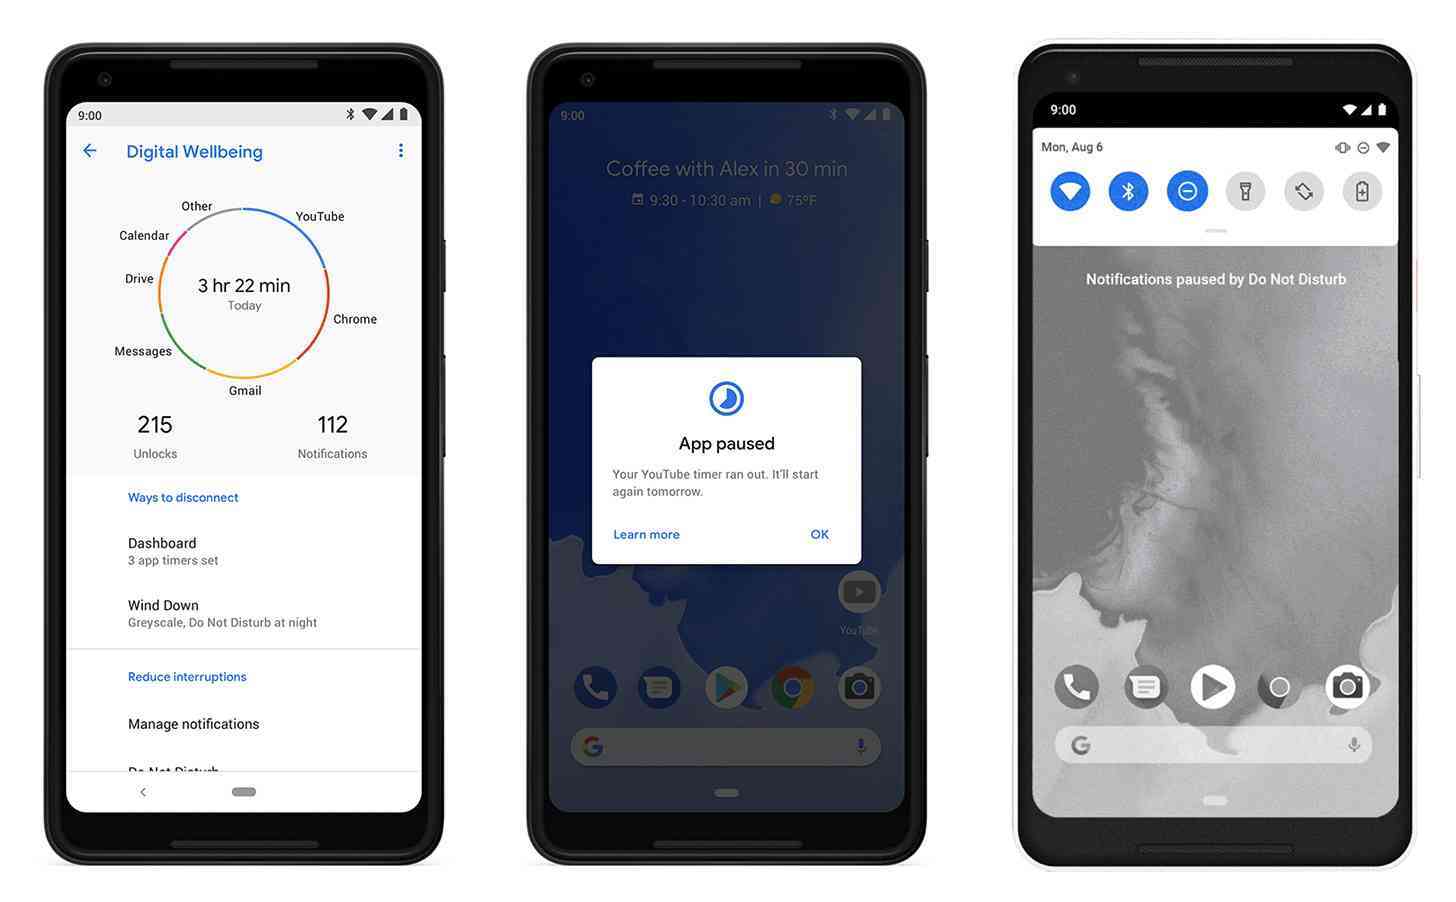 Google's Android Digital Wellbeing